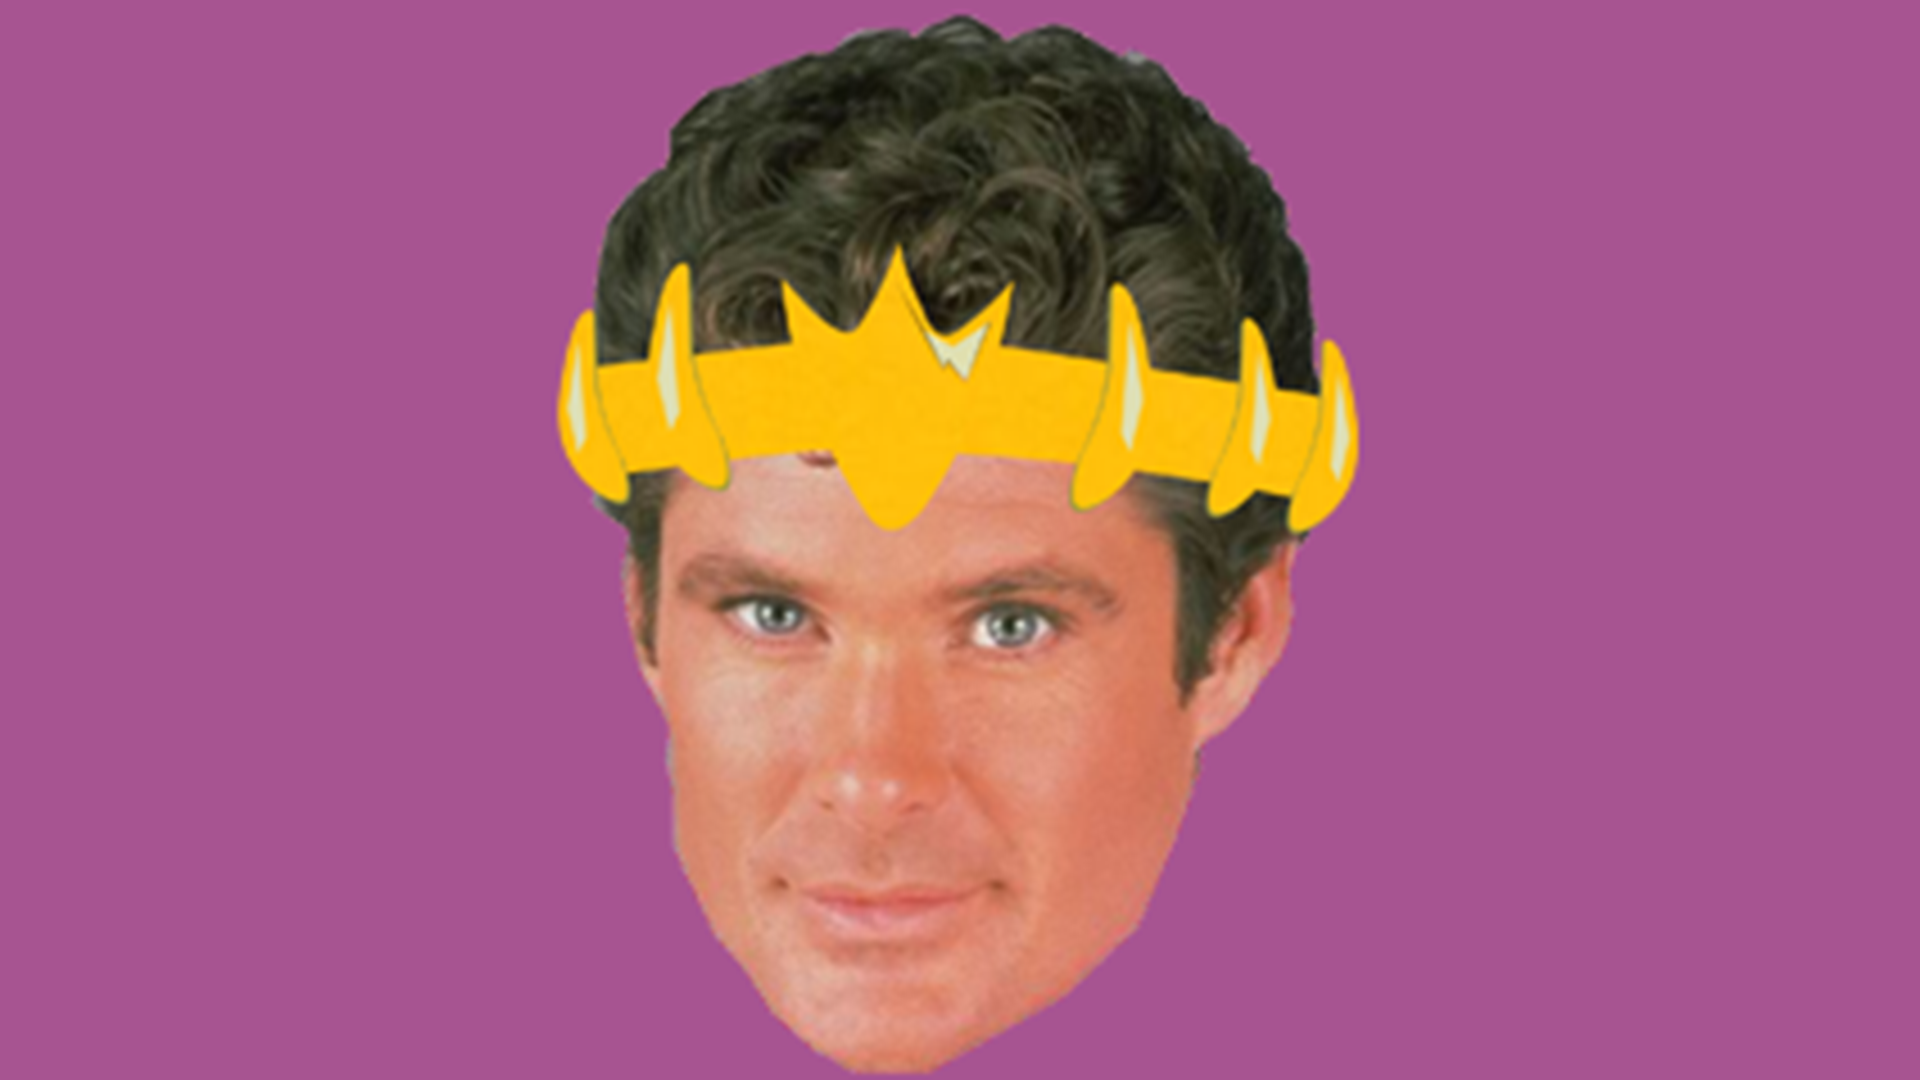 Icon for Face Hoff